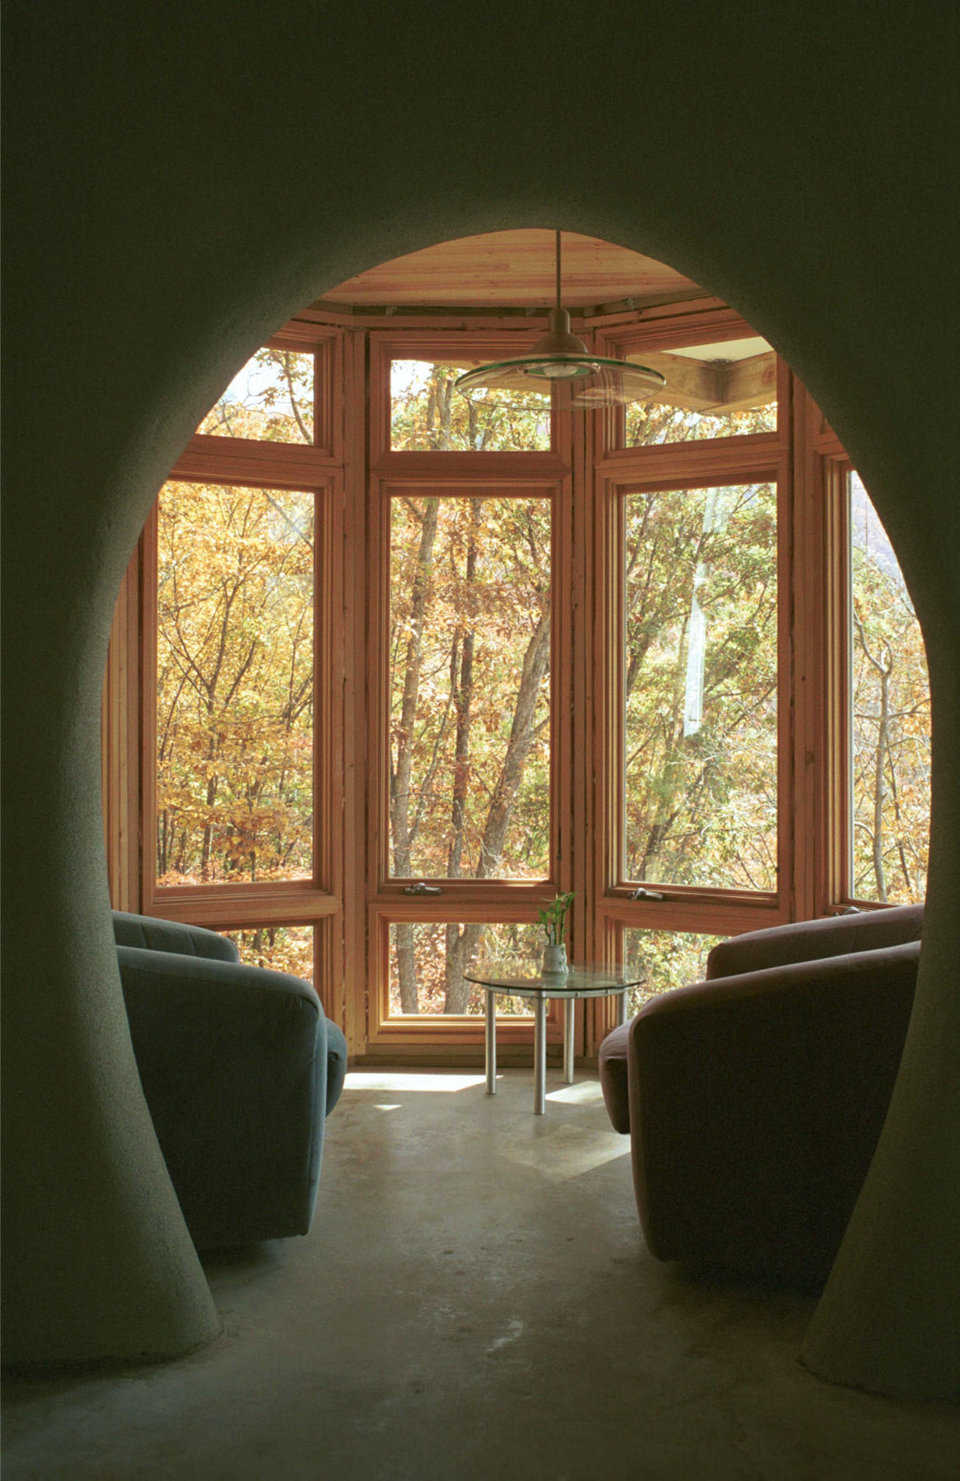 Favorite reading nook — This nook, cantilevered off the dome, was originally planned as a breakfast area, but is now a favorite spot for reading.